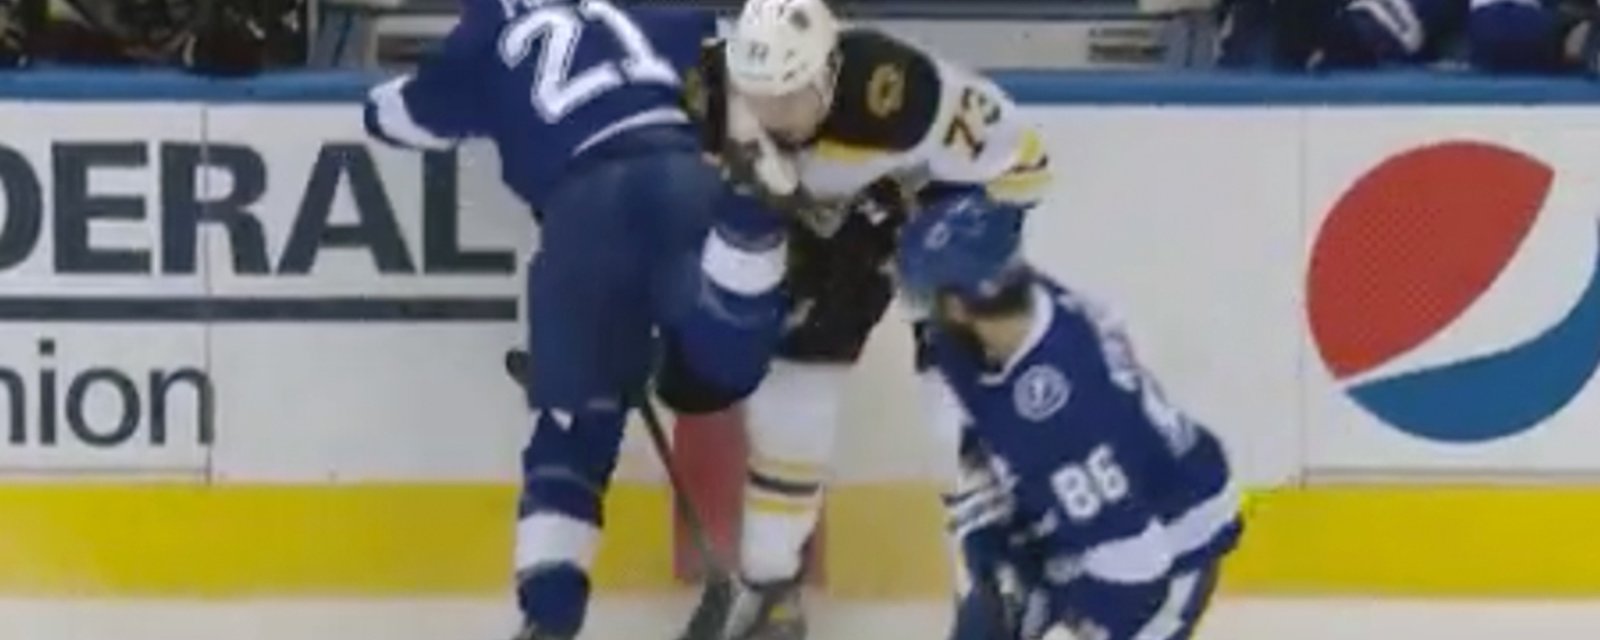 Scary moment as McAvoy takes a skate to the face